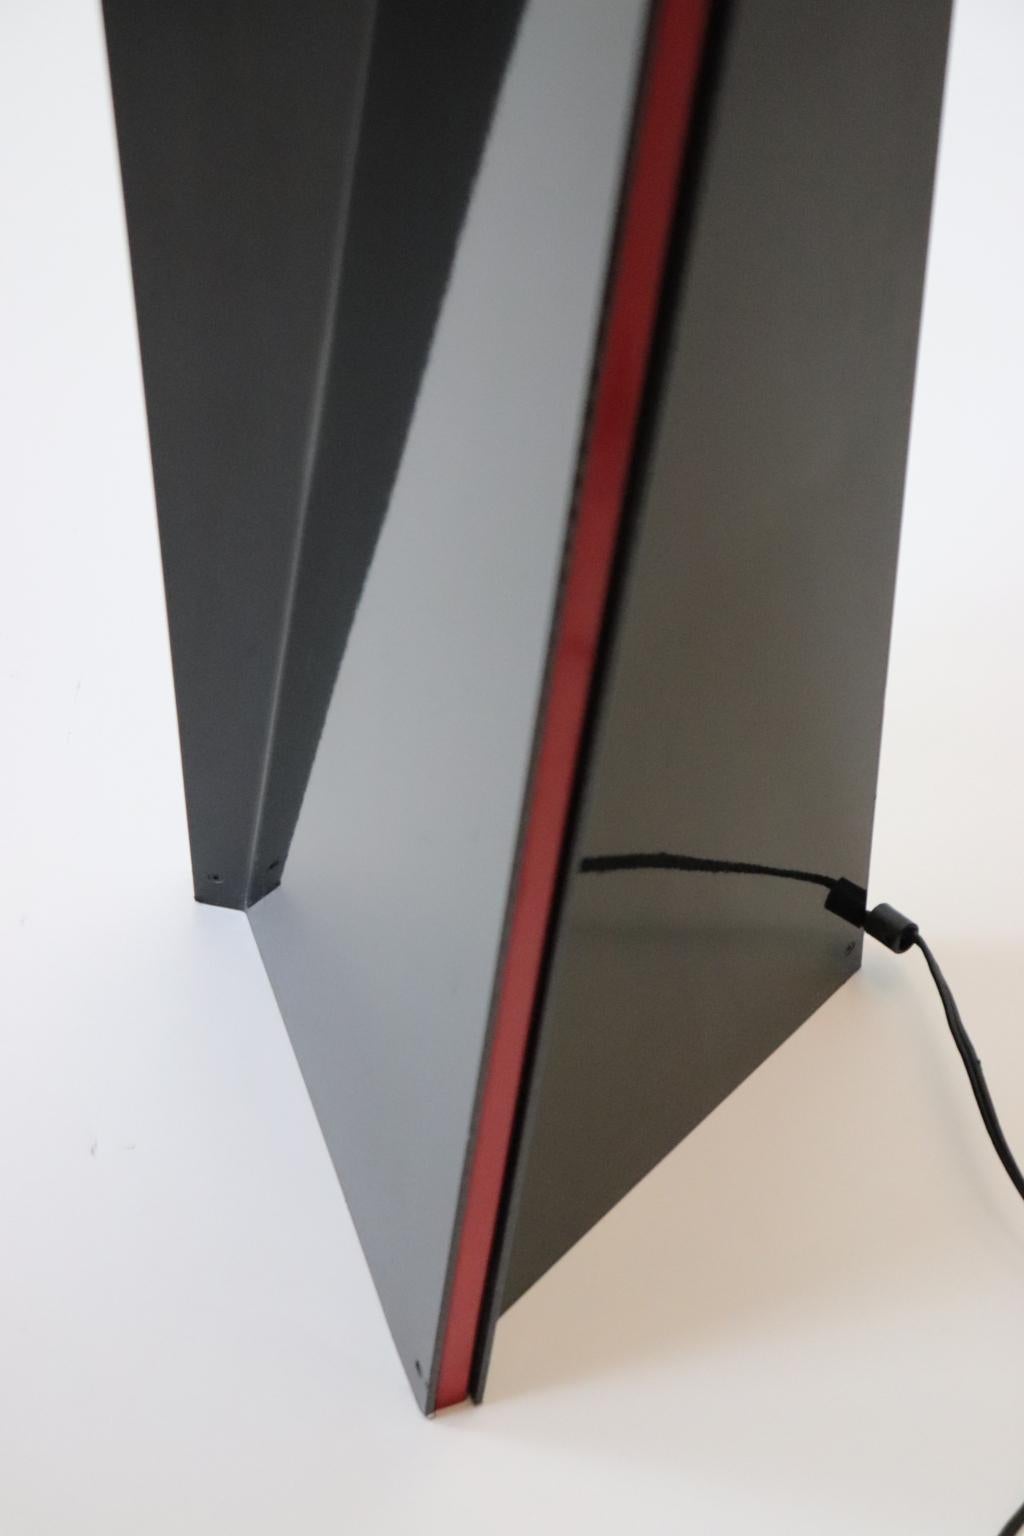 Mauro Marzollo Sculptured Floor Lamp Black with Red Stripes Details For Sale 5